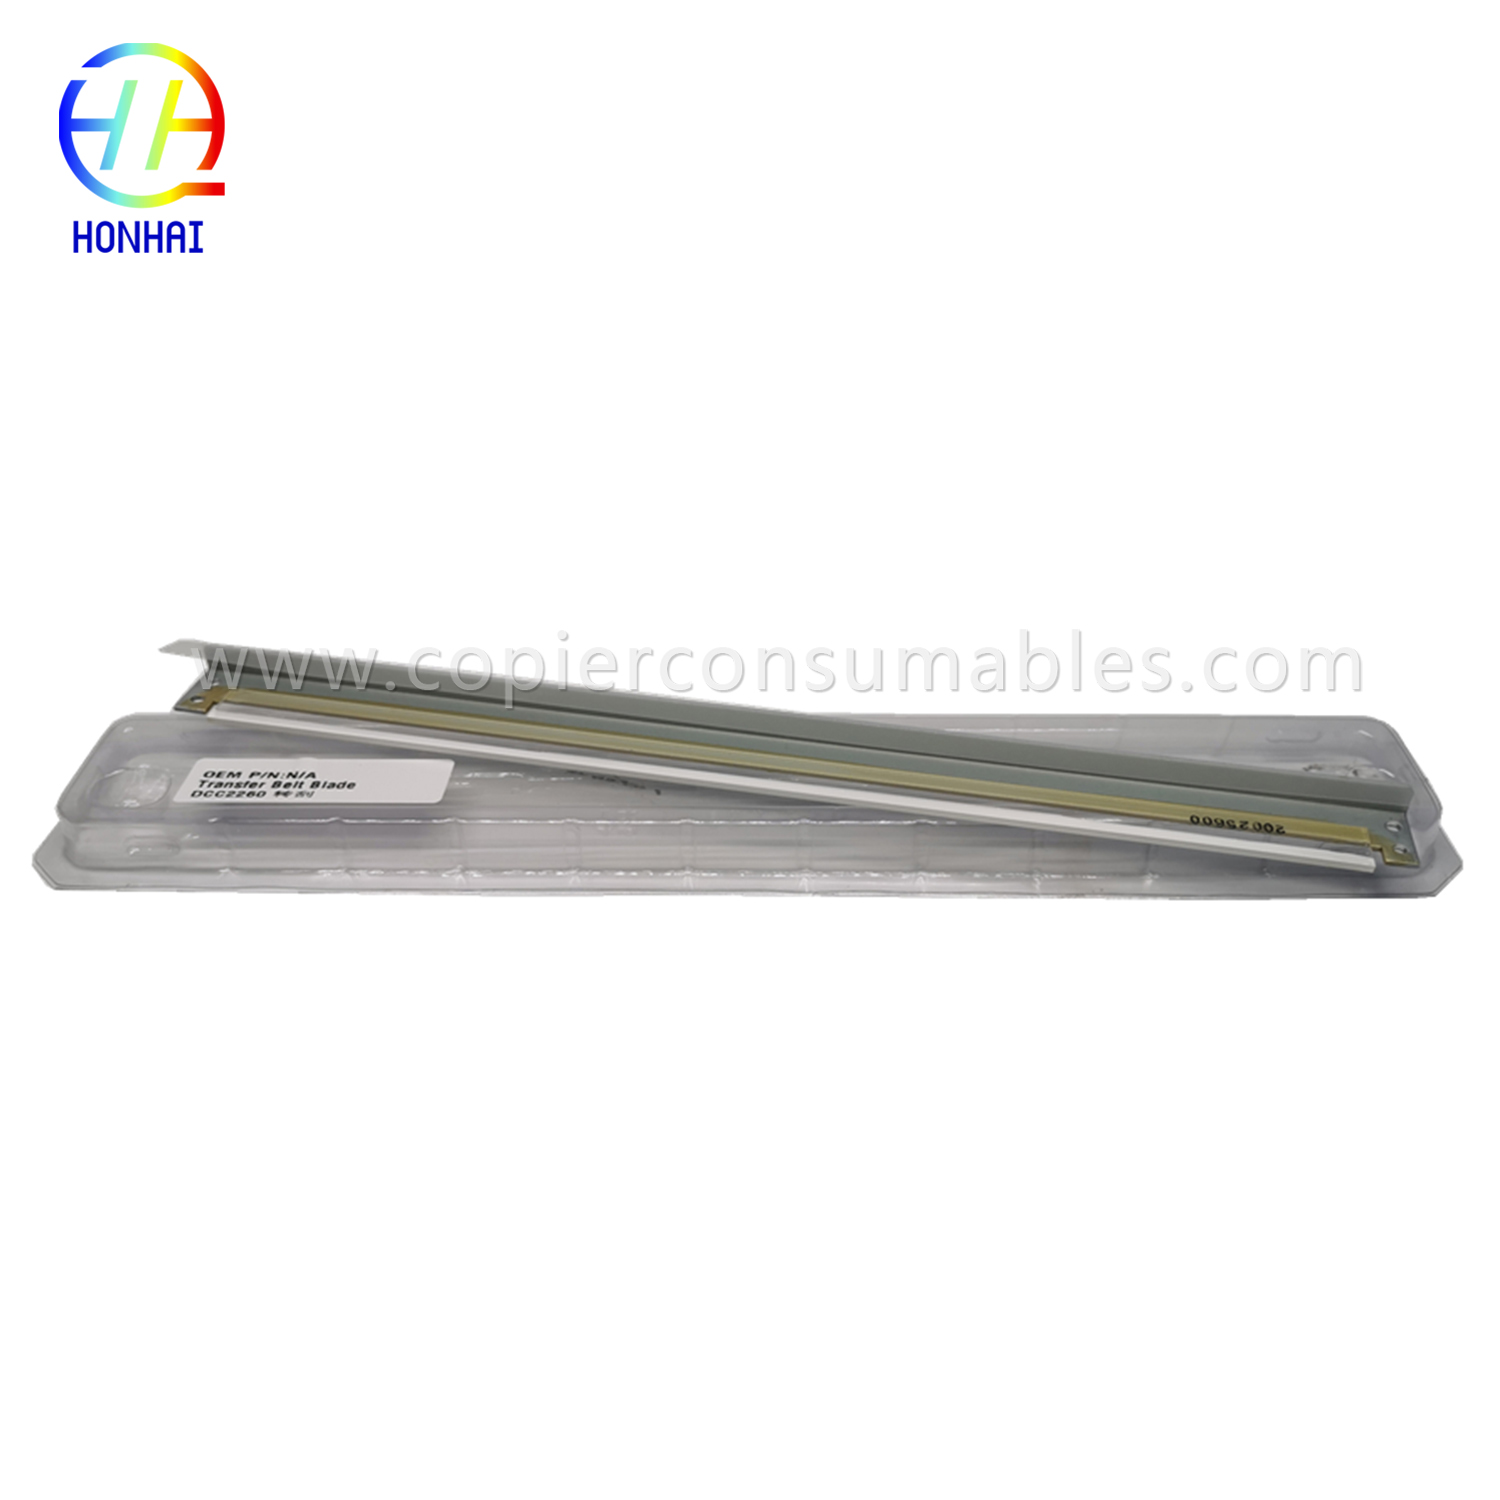 Transfer Cleaning Blade para sa Xerox Docucentre-IV C2260 C2263 C2265 Workcentre 7120 7125 7220 7225 (2)